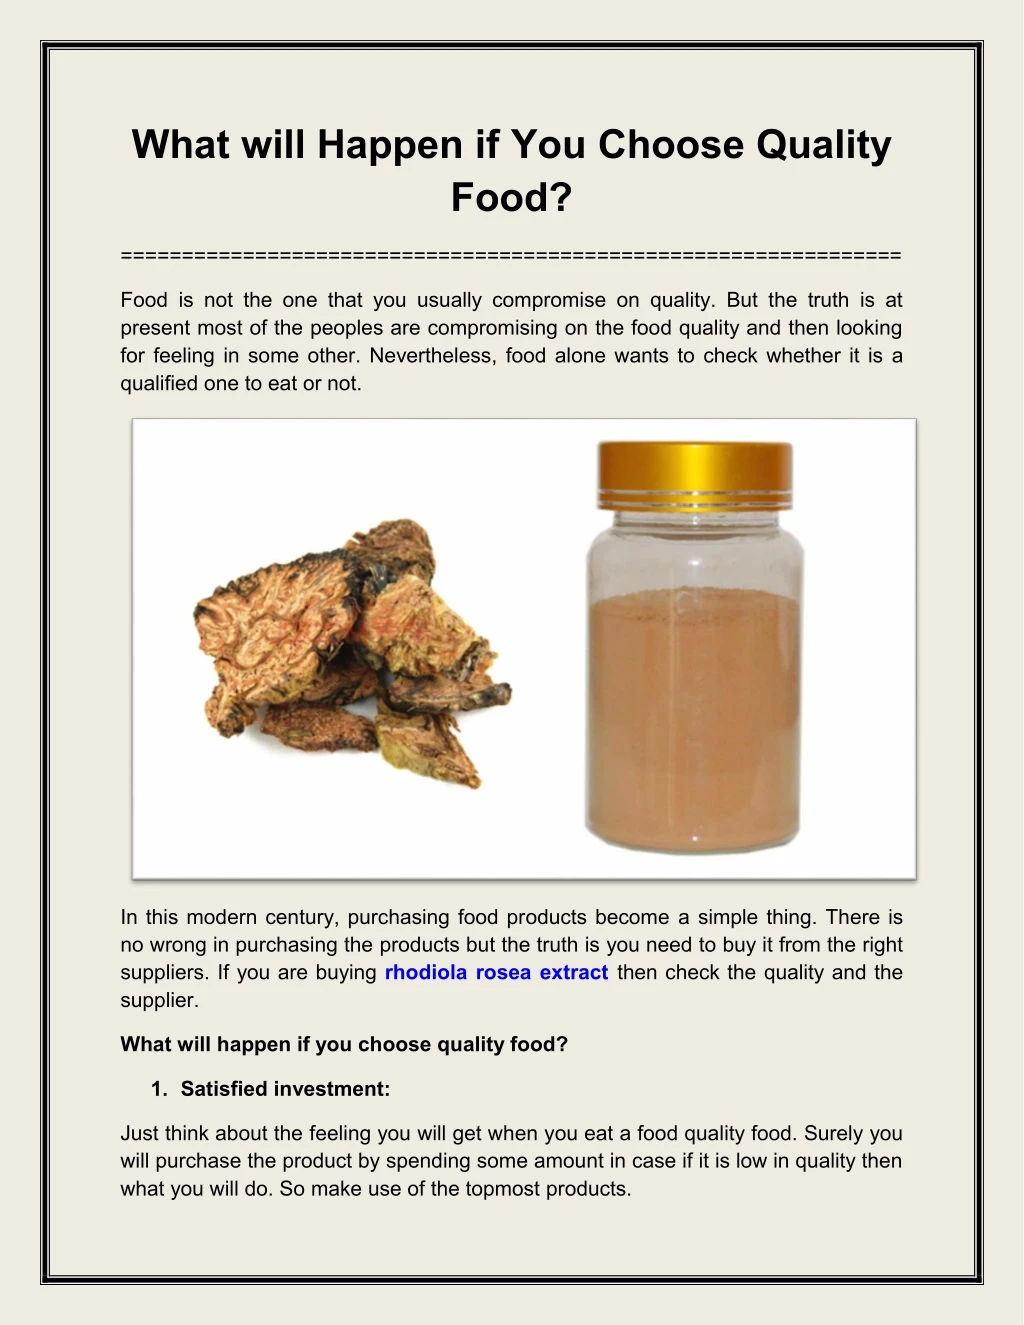 what will happen if you choose quality food